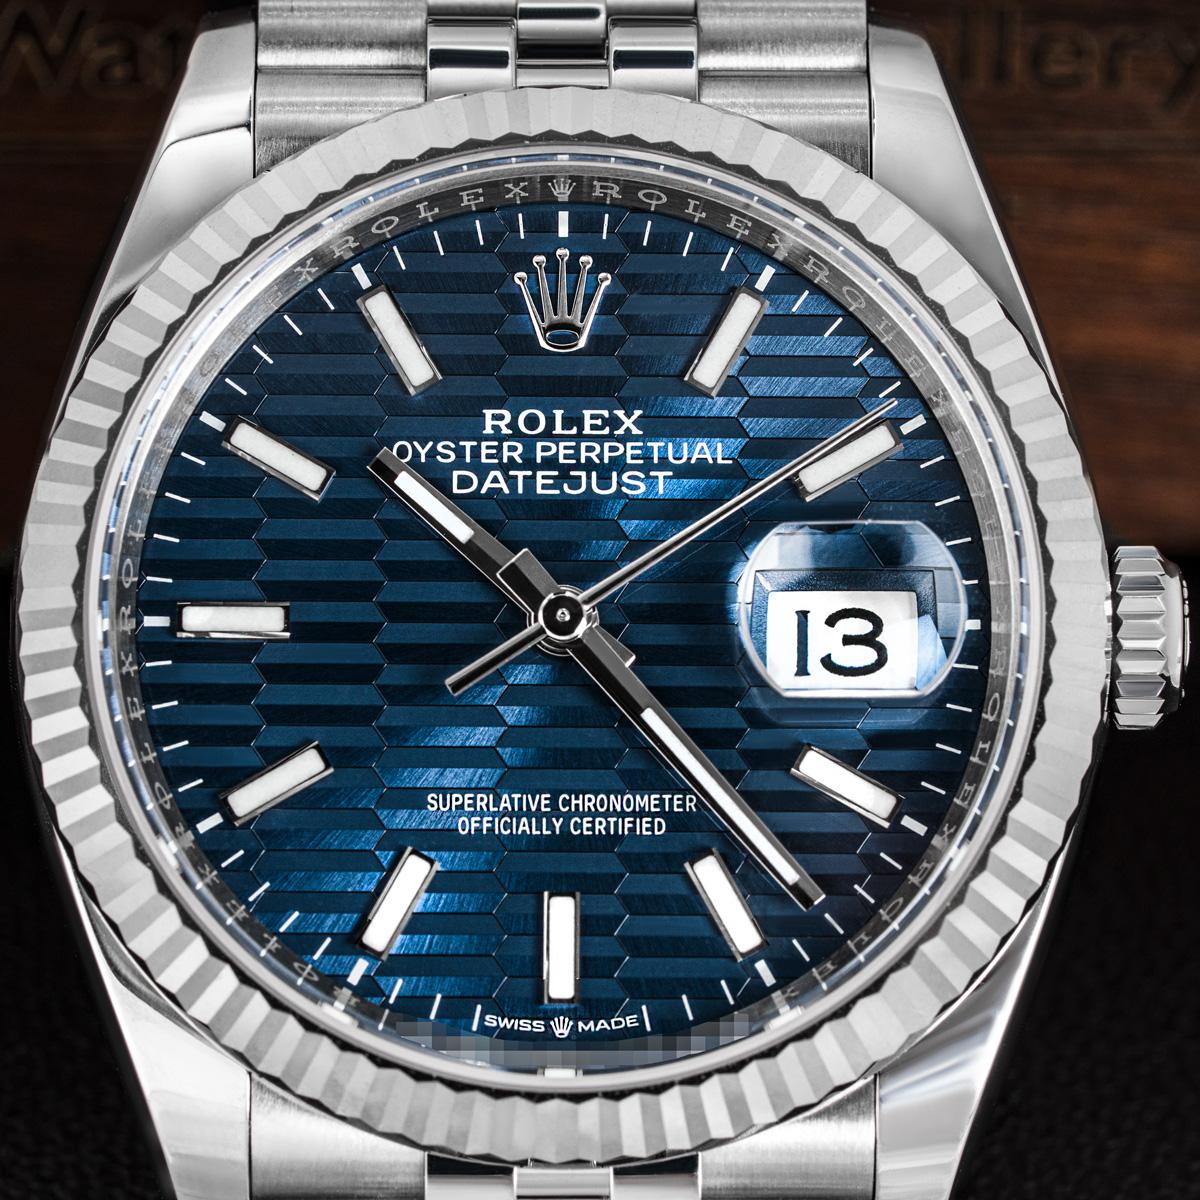 An unworn 36mm Datejust in stainless steel by Rolex. Features a blue fluted motif dial with applied hour markers and a fluted white gold bezel. Equipped with a stainless steel Jubilee bracelet and a steel folding clasp. The watch is also fitted with